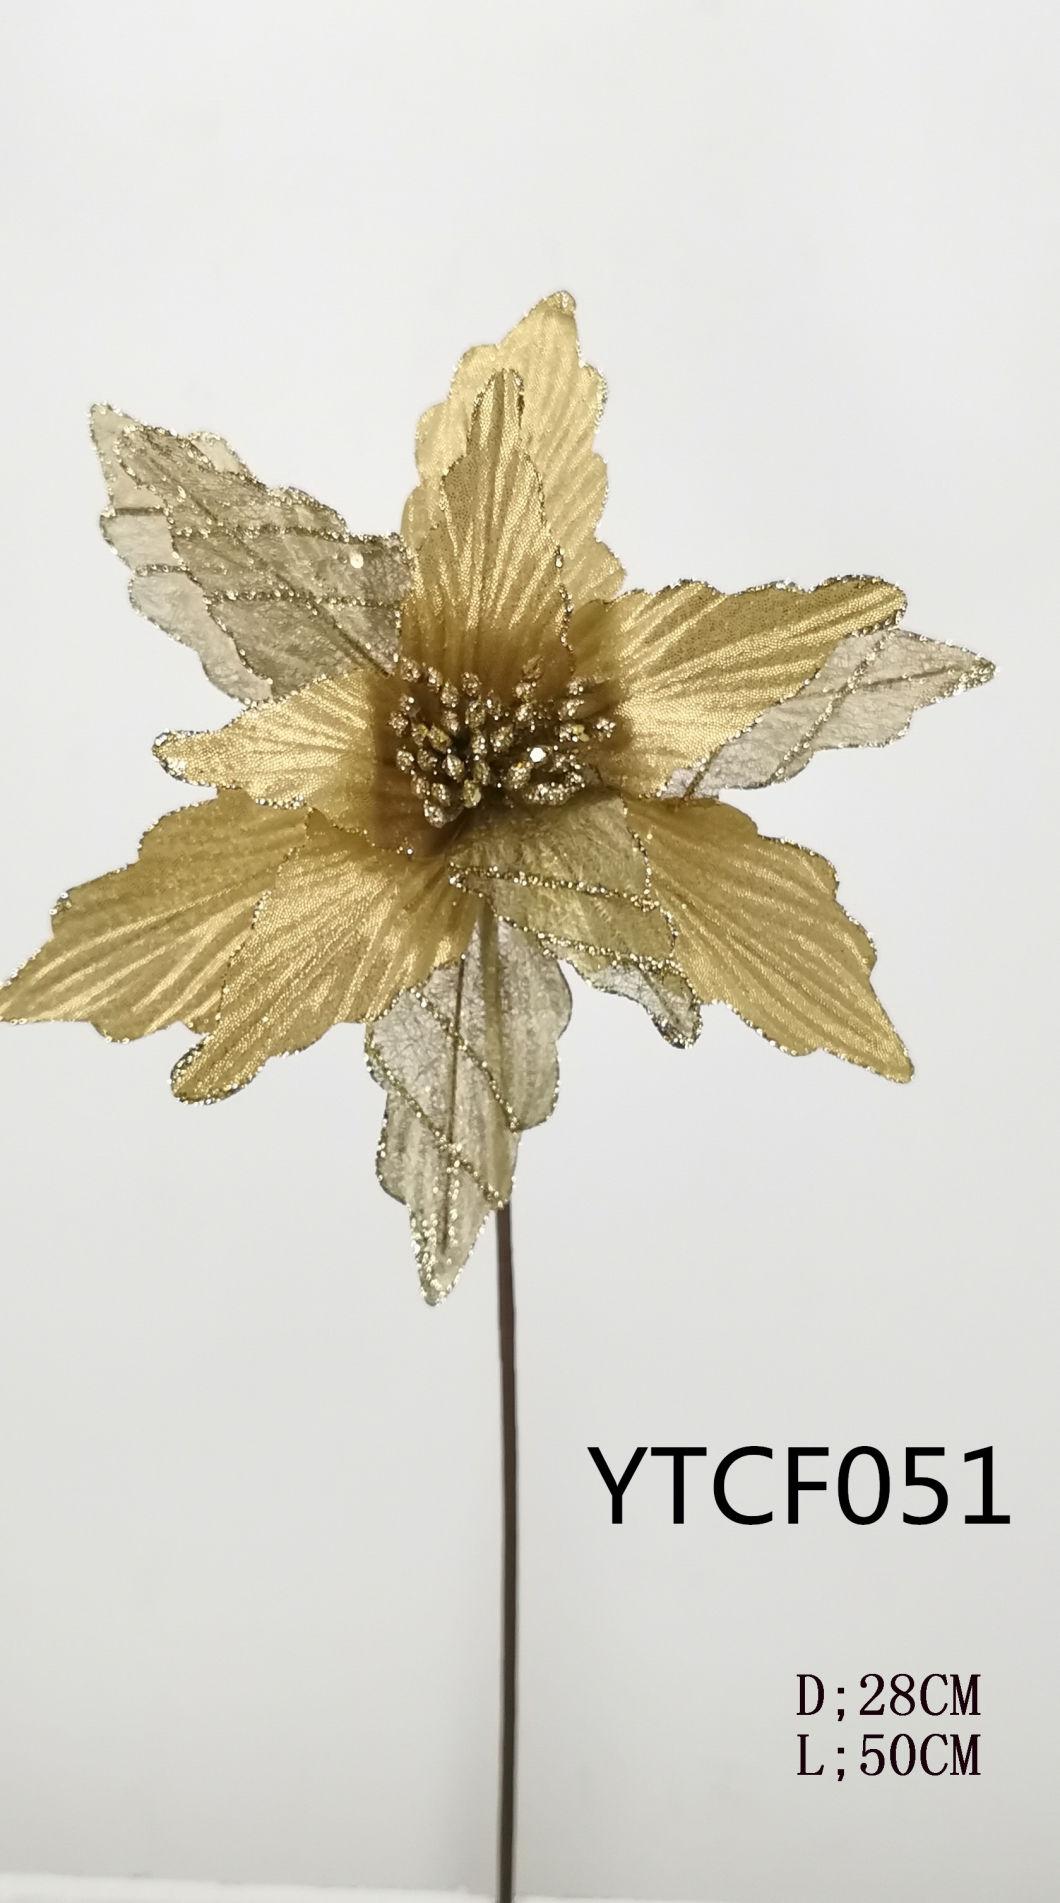 Ytcf053 Big Size 36cm Gold Color Glitter Flowers for Xmas Festival